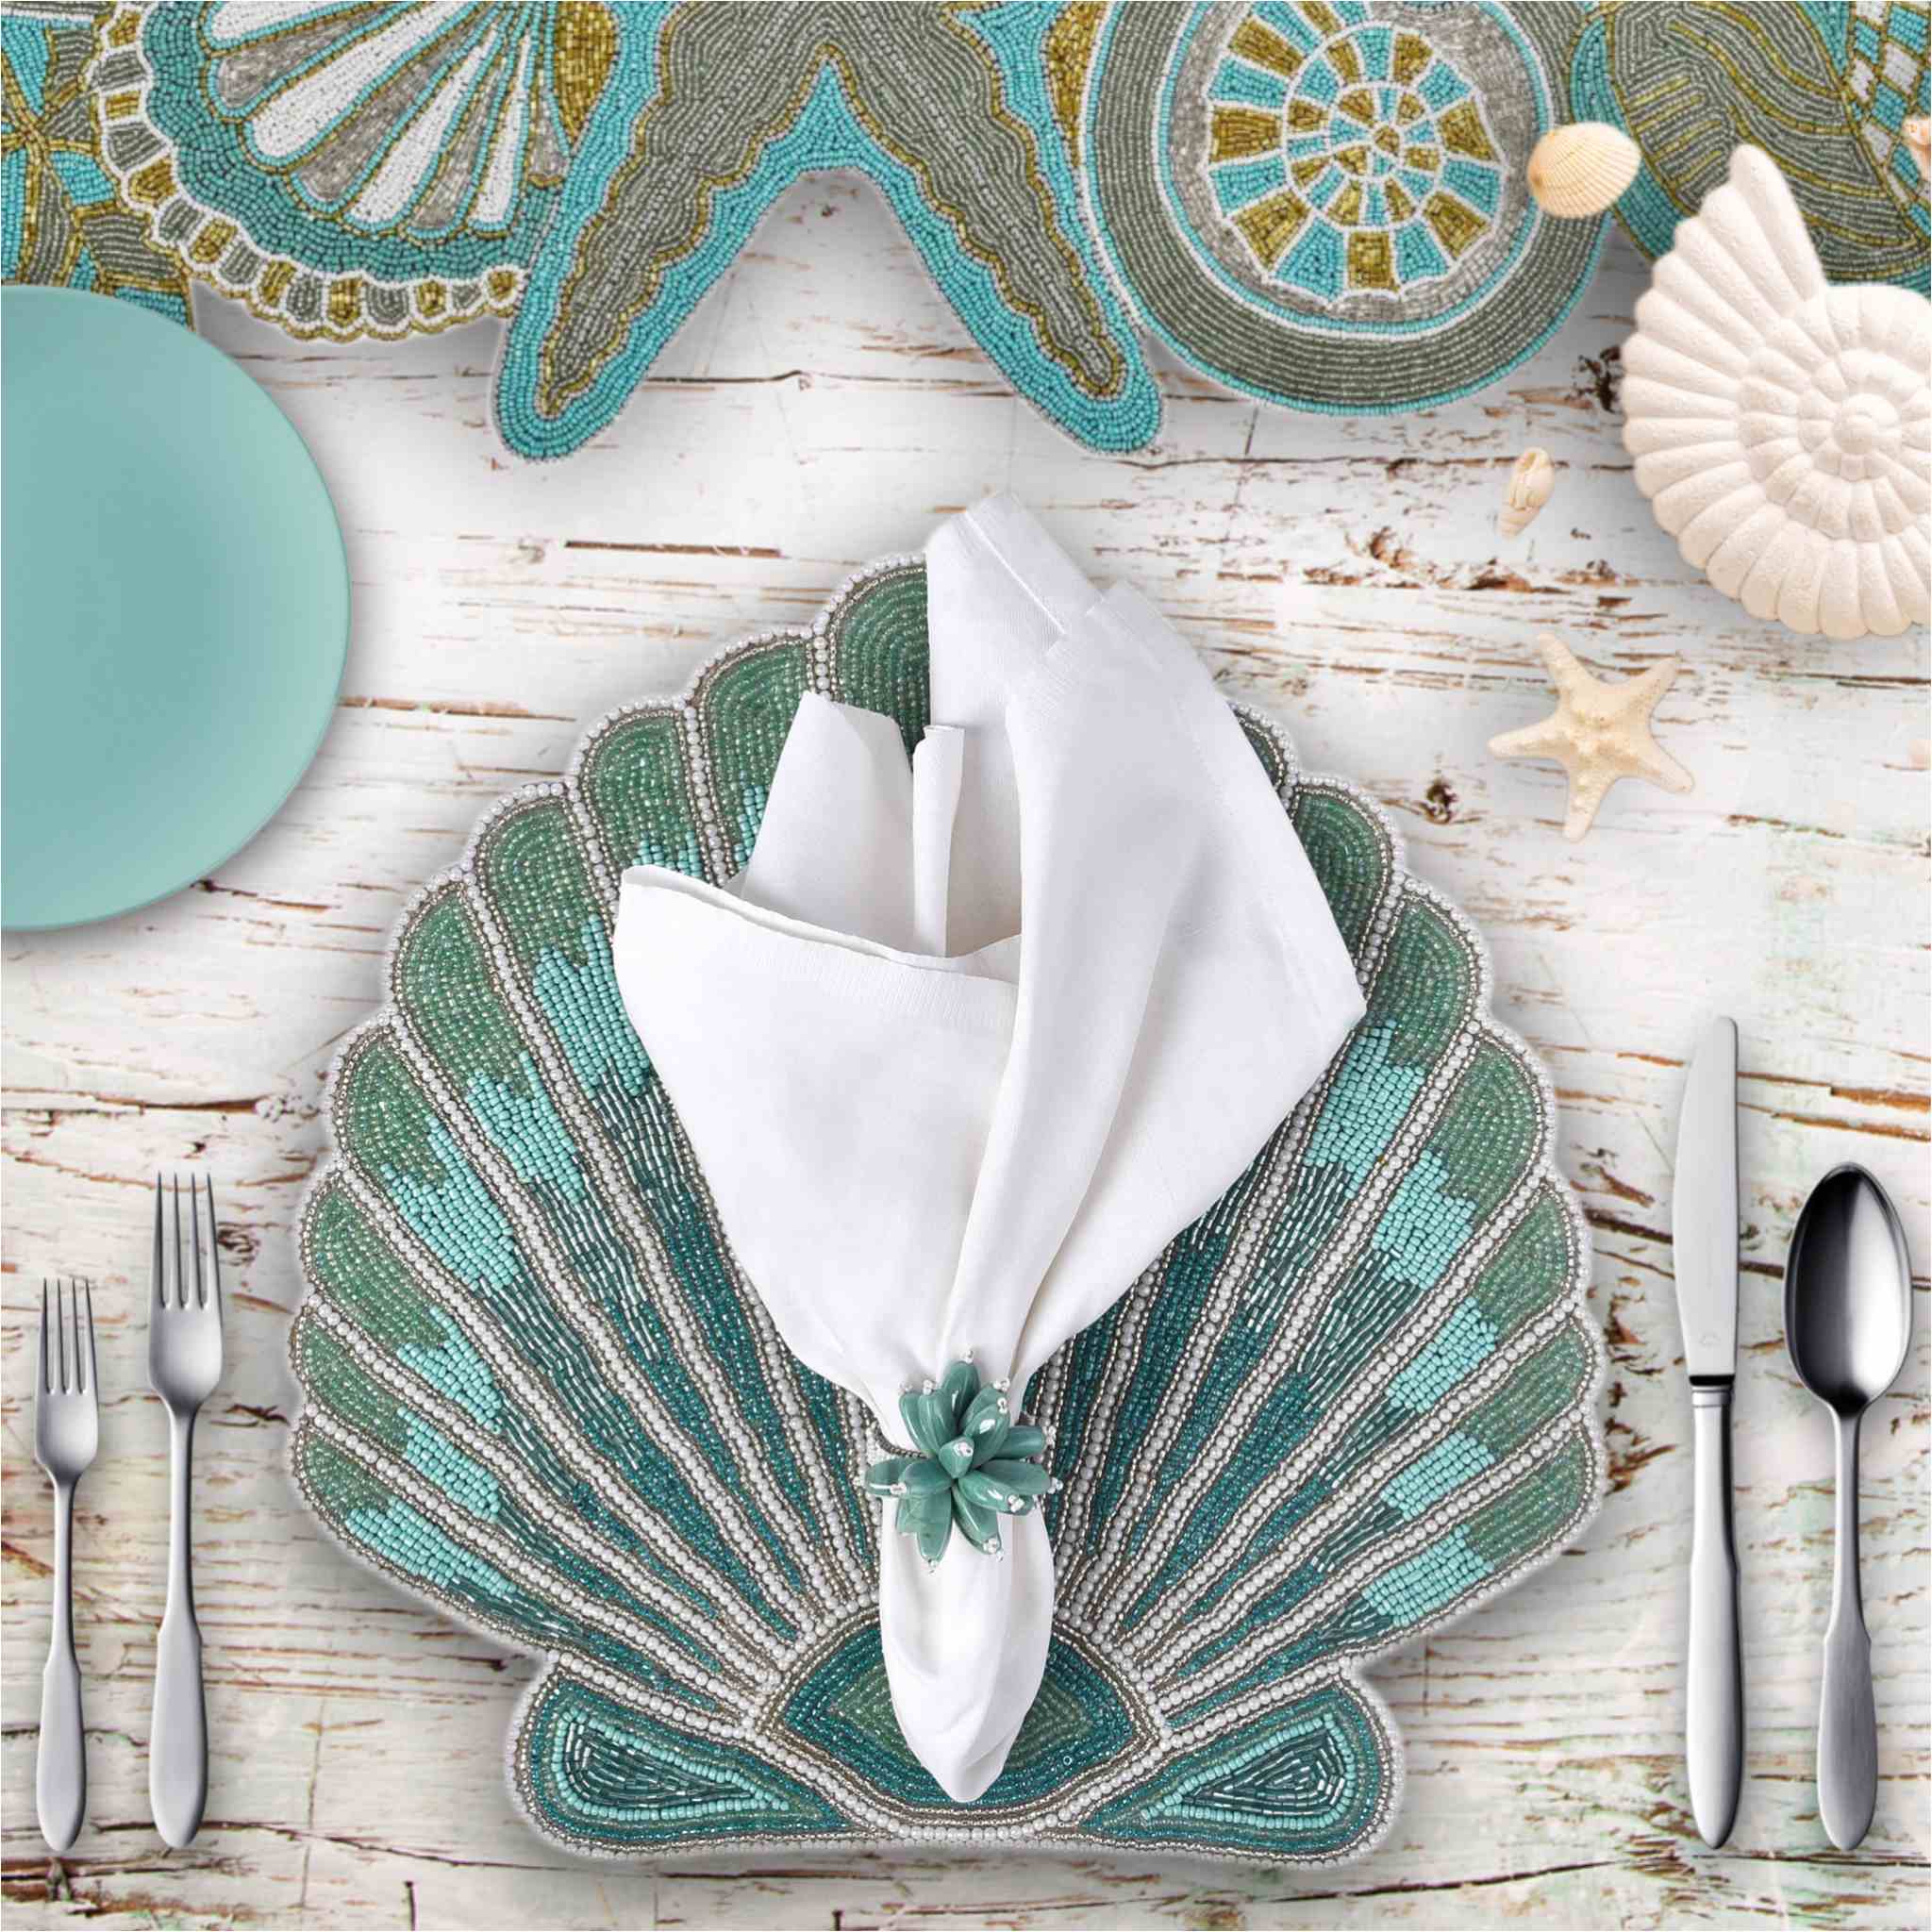 Clam-Up Embroidered Placemat in Teal, Set of 2/4